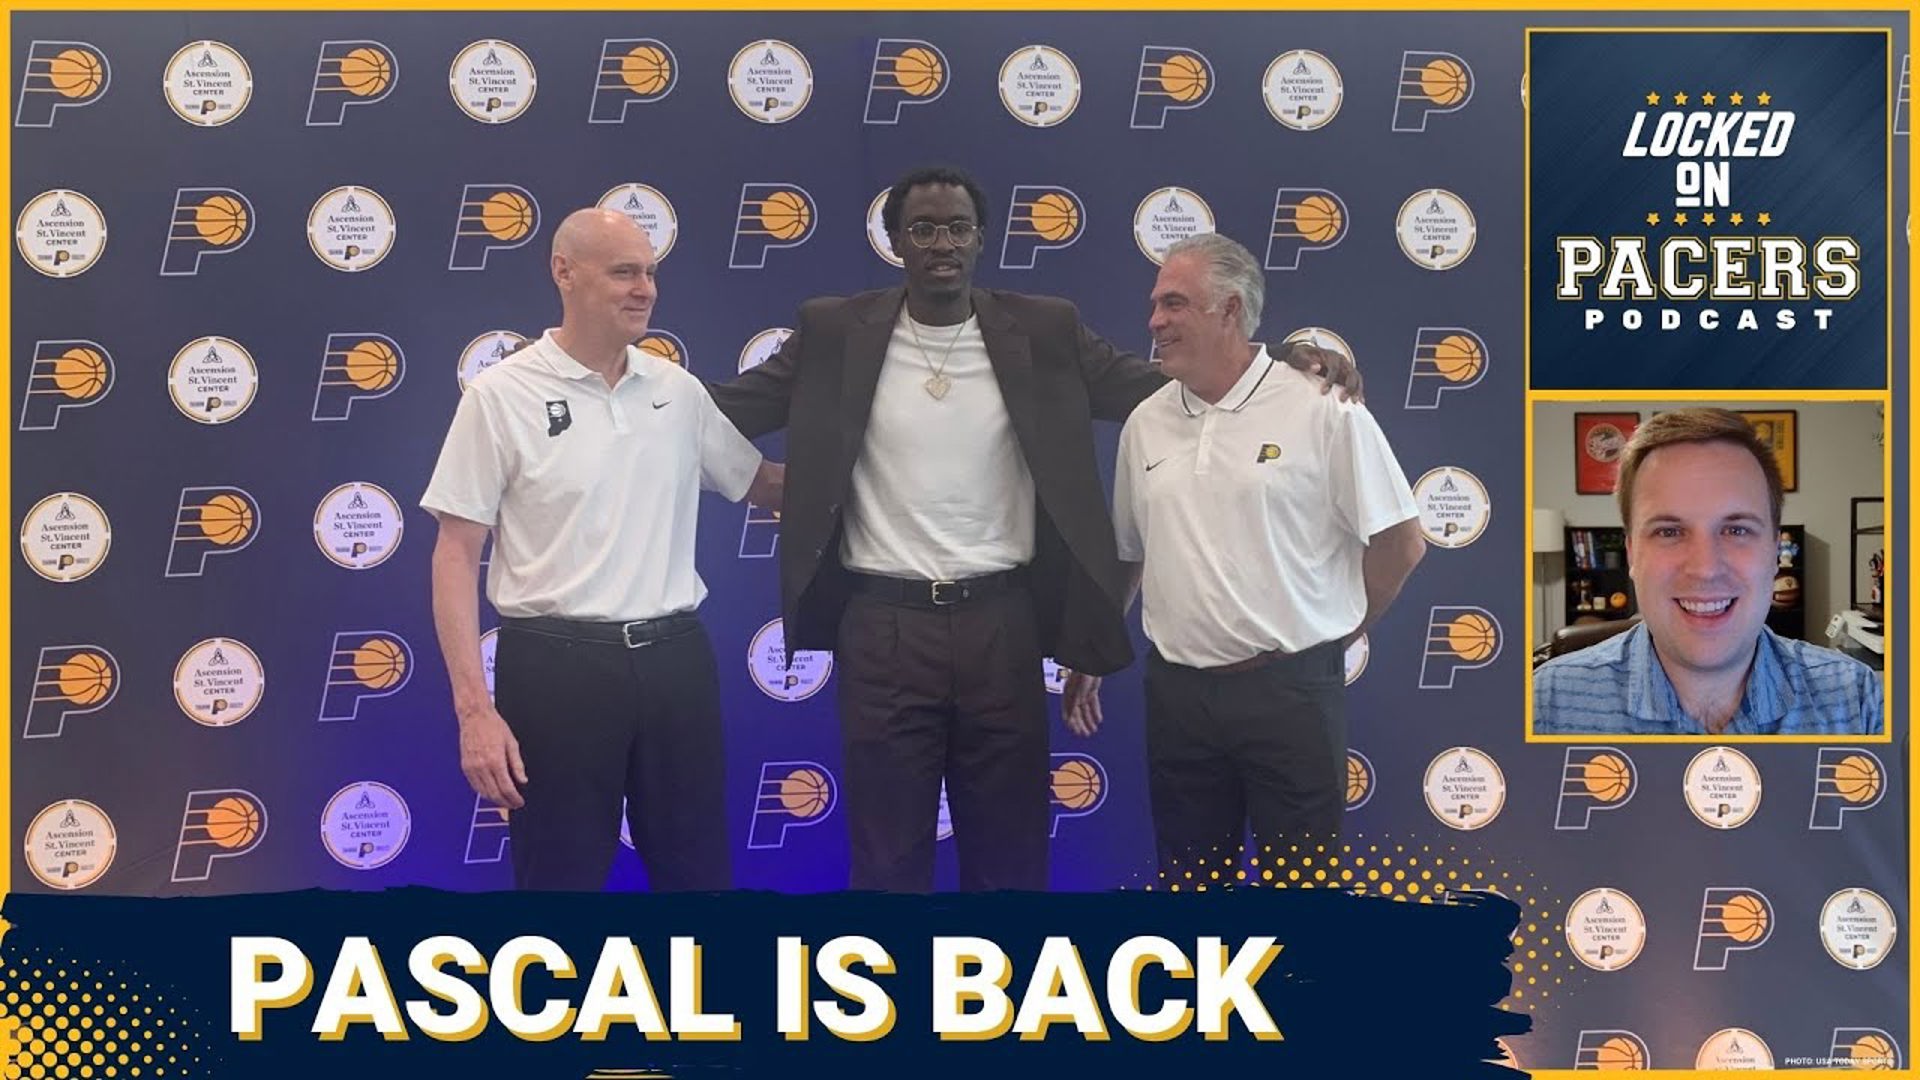 How the Indiana Pacers got Pascal Siakam to re-sign. Rick Carlisle discusses Jarace Walker's role